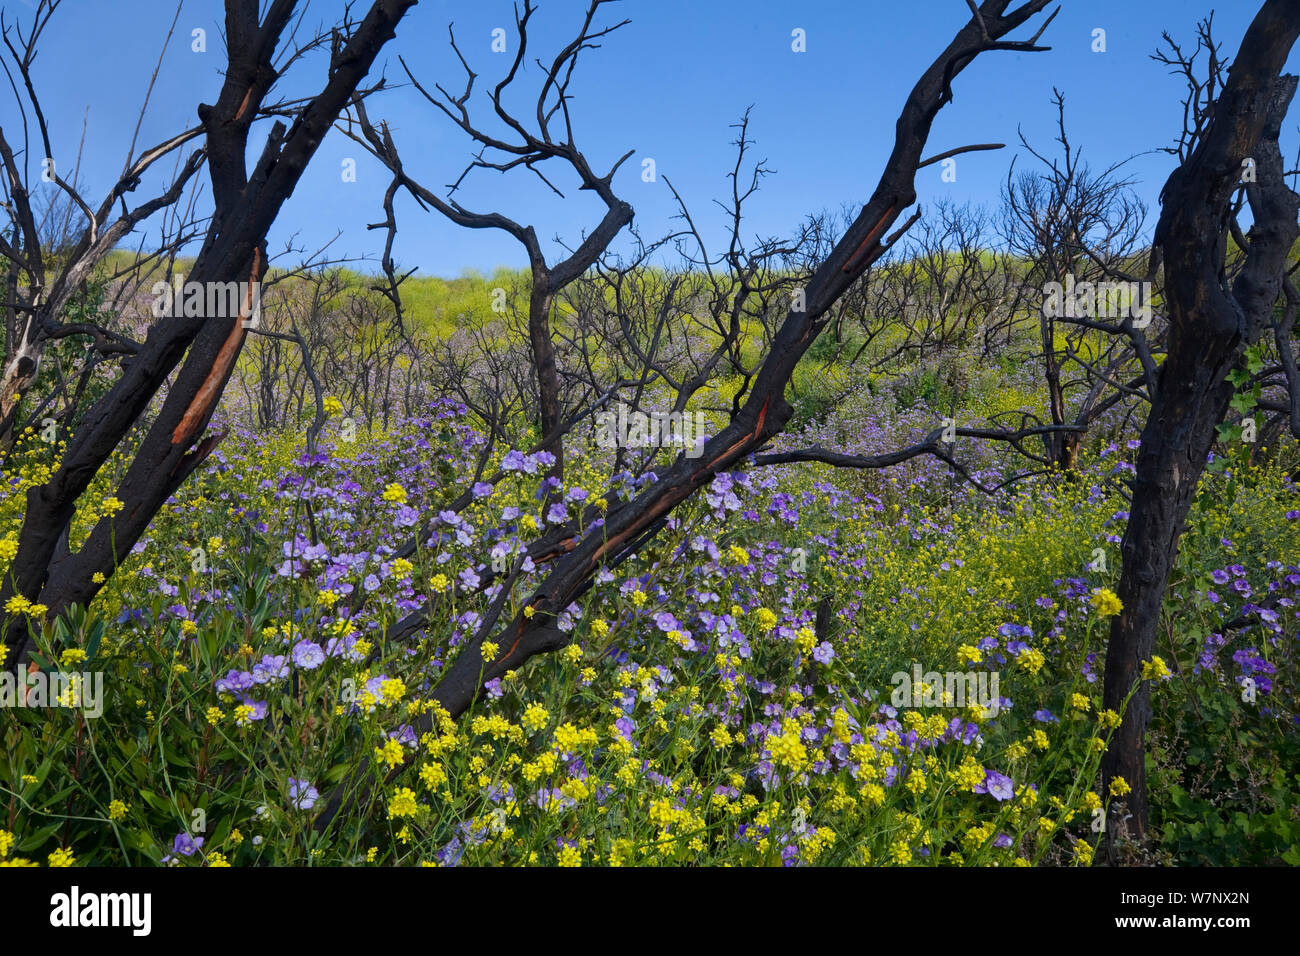 Spring flowers including Phacelia and Mustard  in the burned remnants of the Angeles National Forest after the Station Fire of 2009, Southern California, USA, May 2010. Stock Photo